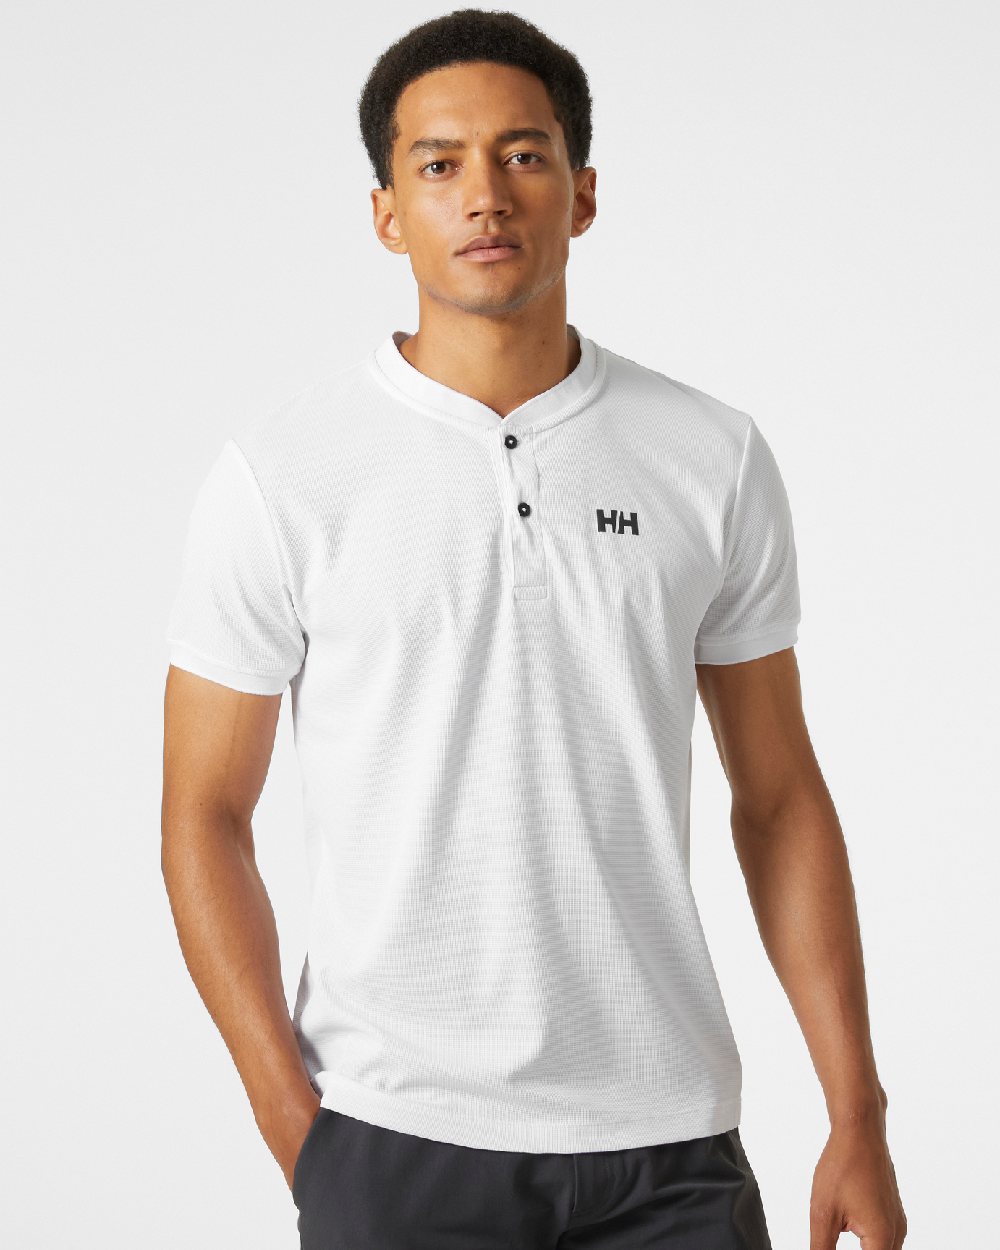 White Coloured Helly Hansen Mens HP Sun Protective Tops on grey background 